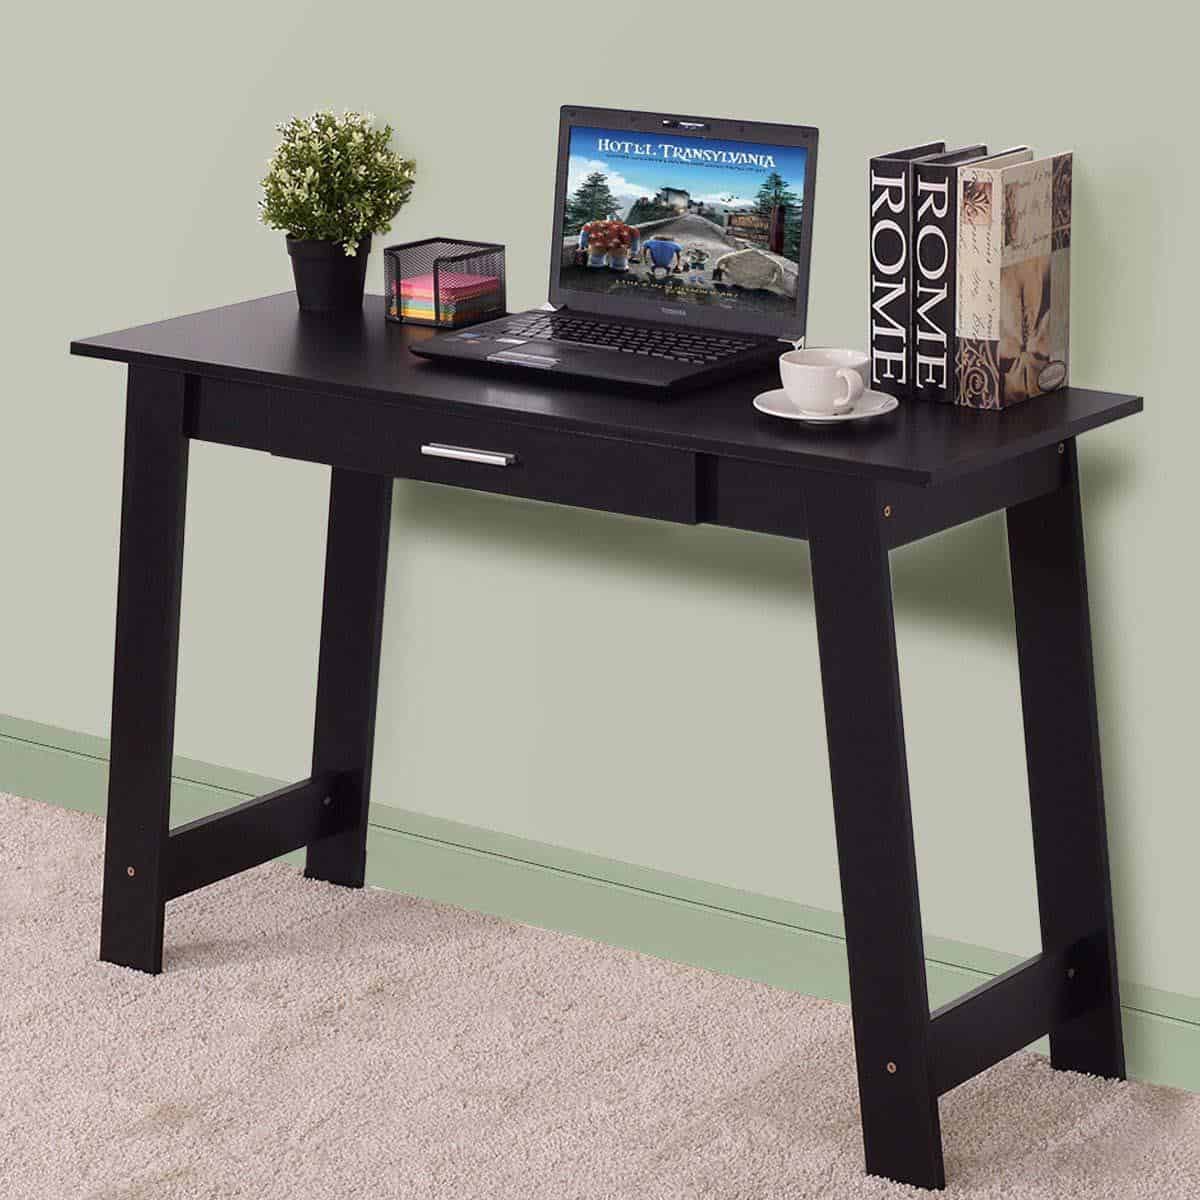 Smaller is Better by Using Casart Writing Table